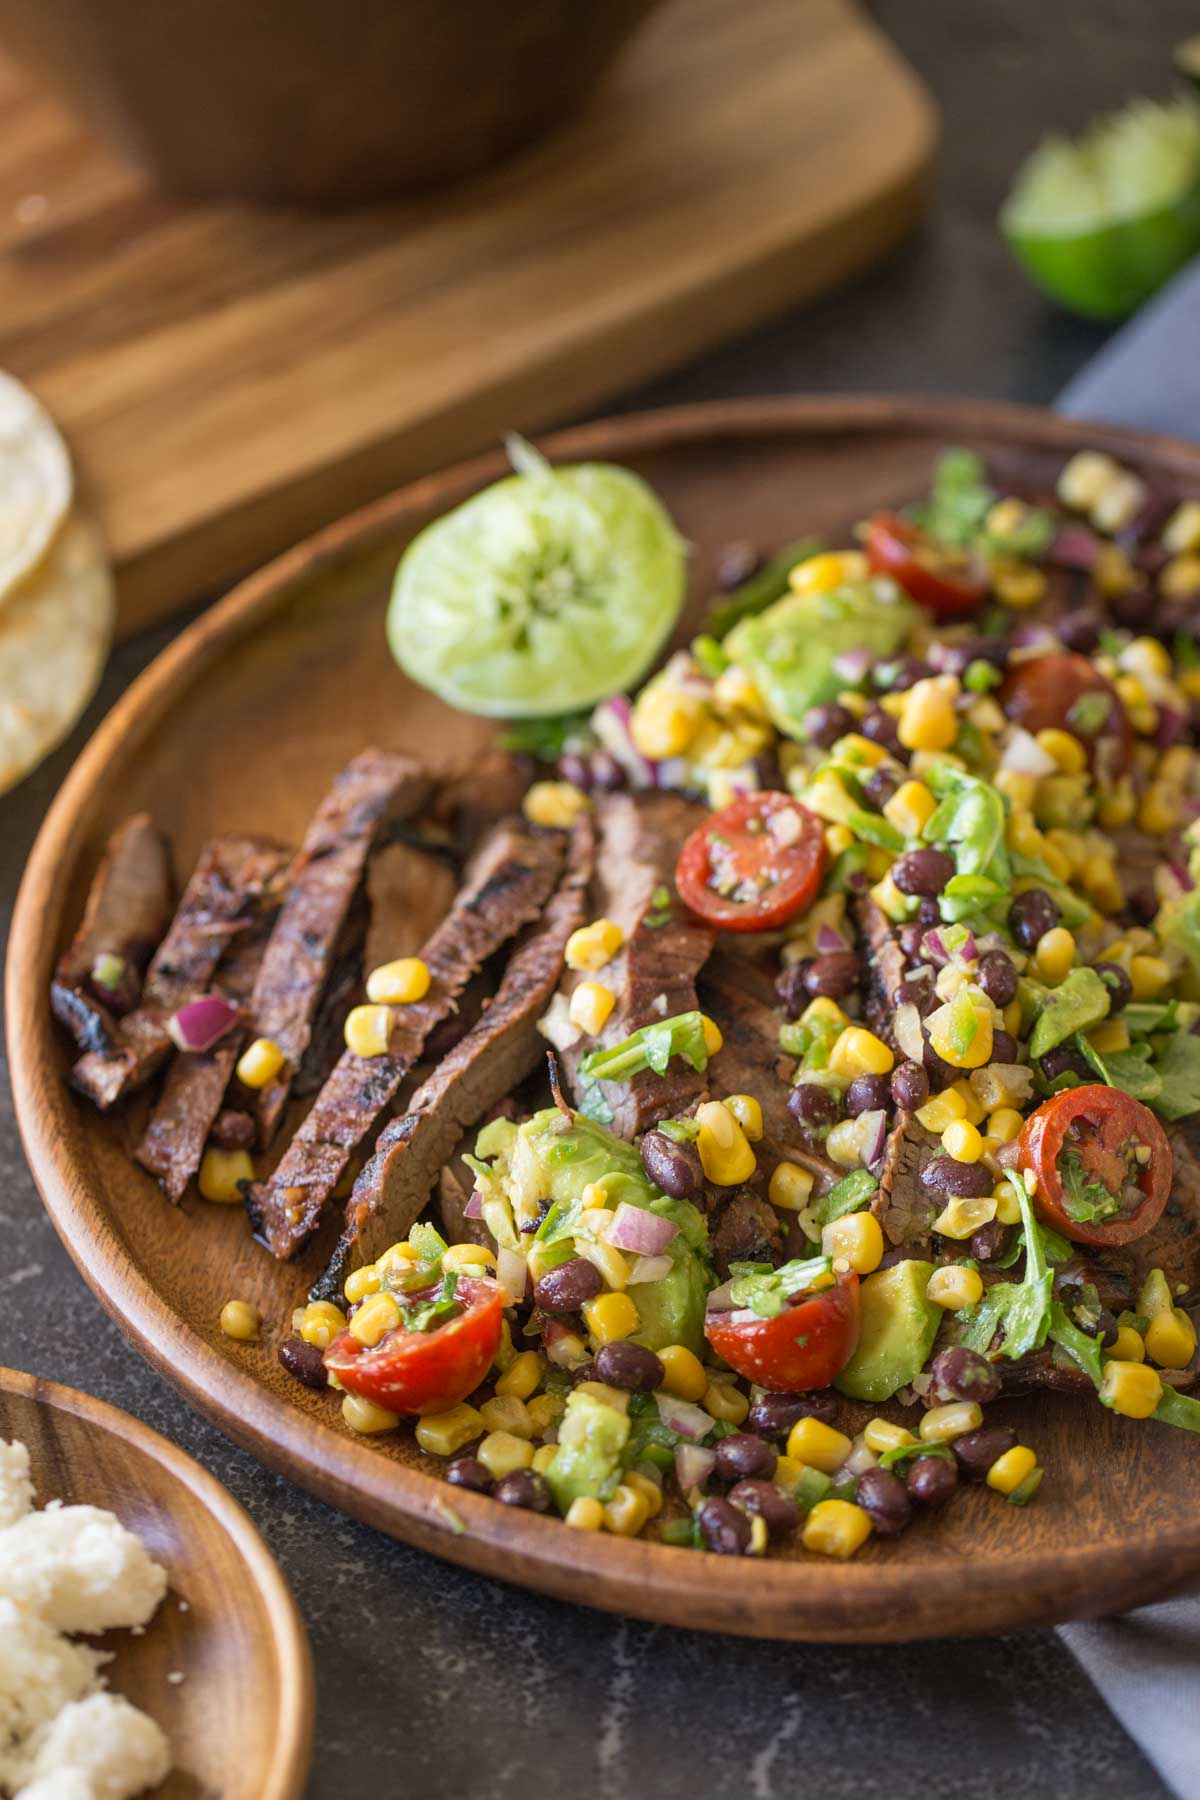 A large wood plate of sliced grilled marinated flank steak and avocado salad.